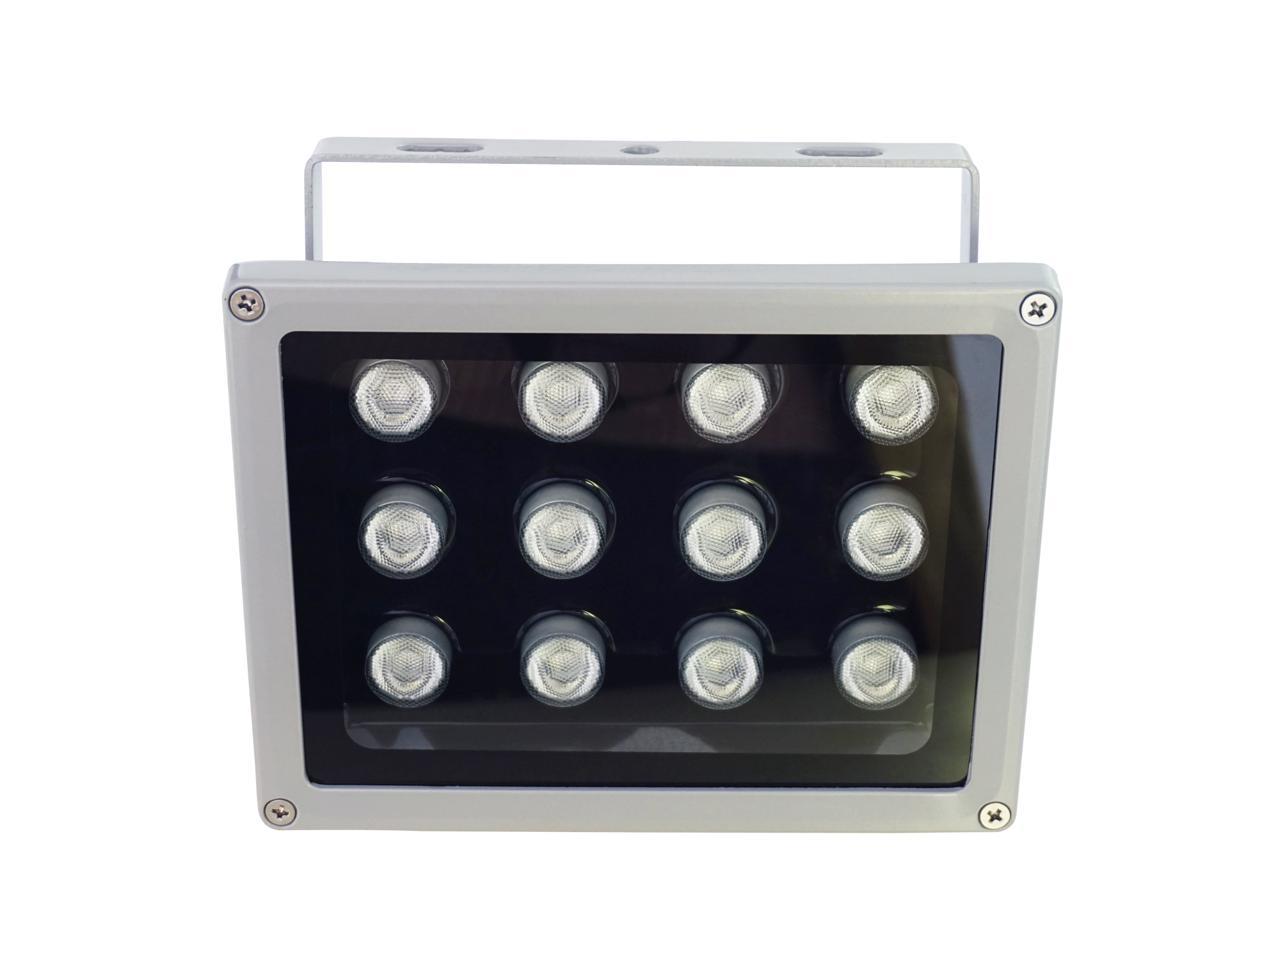 Splenssy 96 LEDS IR Illuminator 850nm Array Infrared Lamps With Sensor 12v Night Vision Outdoor Waterproof For CCTV Security Camera